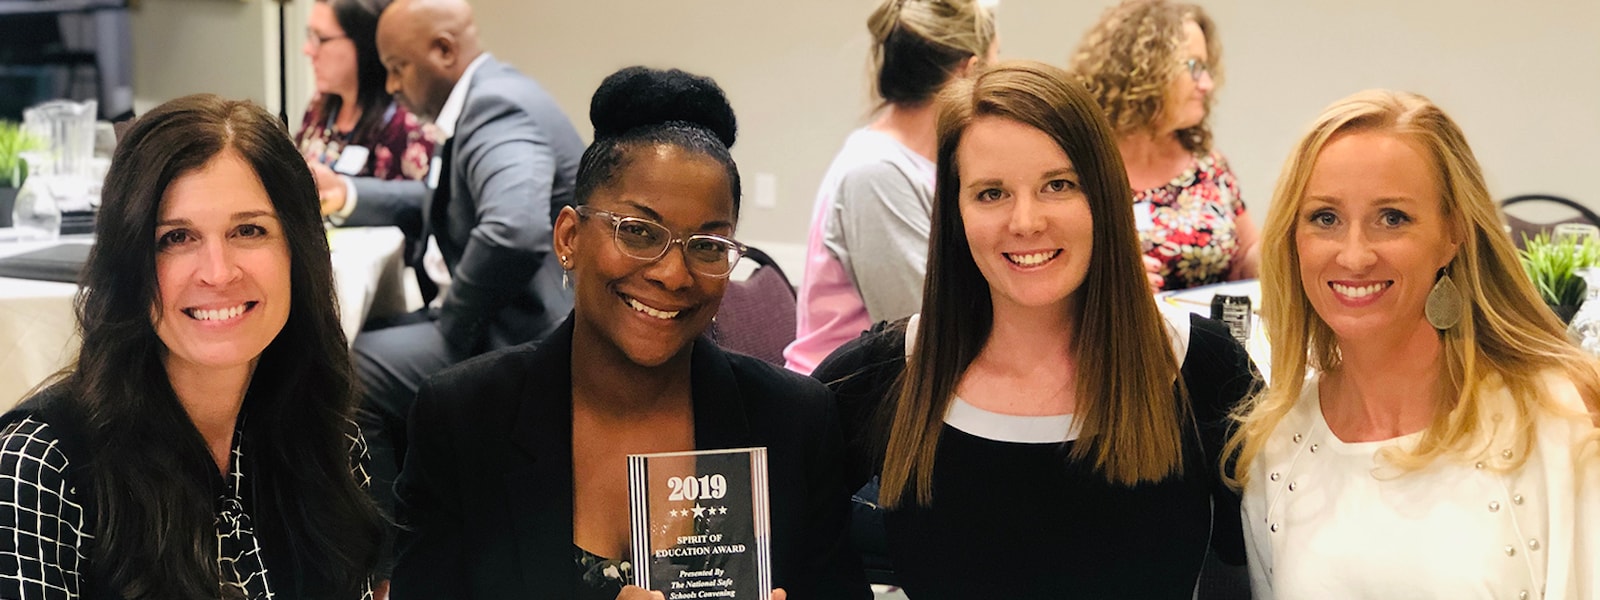 Christina Brown, first grade teacher at Mountain View School, was recently selected as a recipient of the Spirit of Education Award by the National Safe Schools Convening.